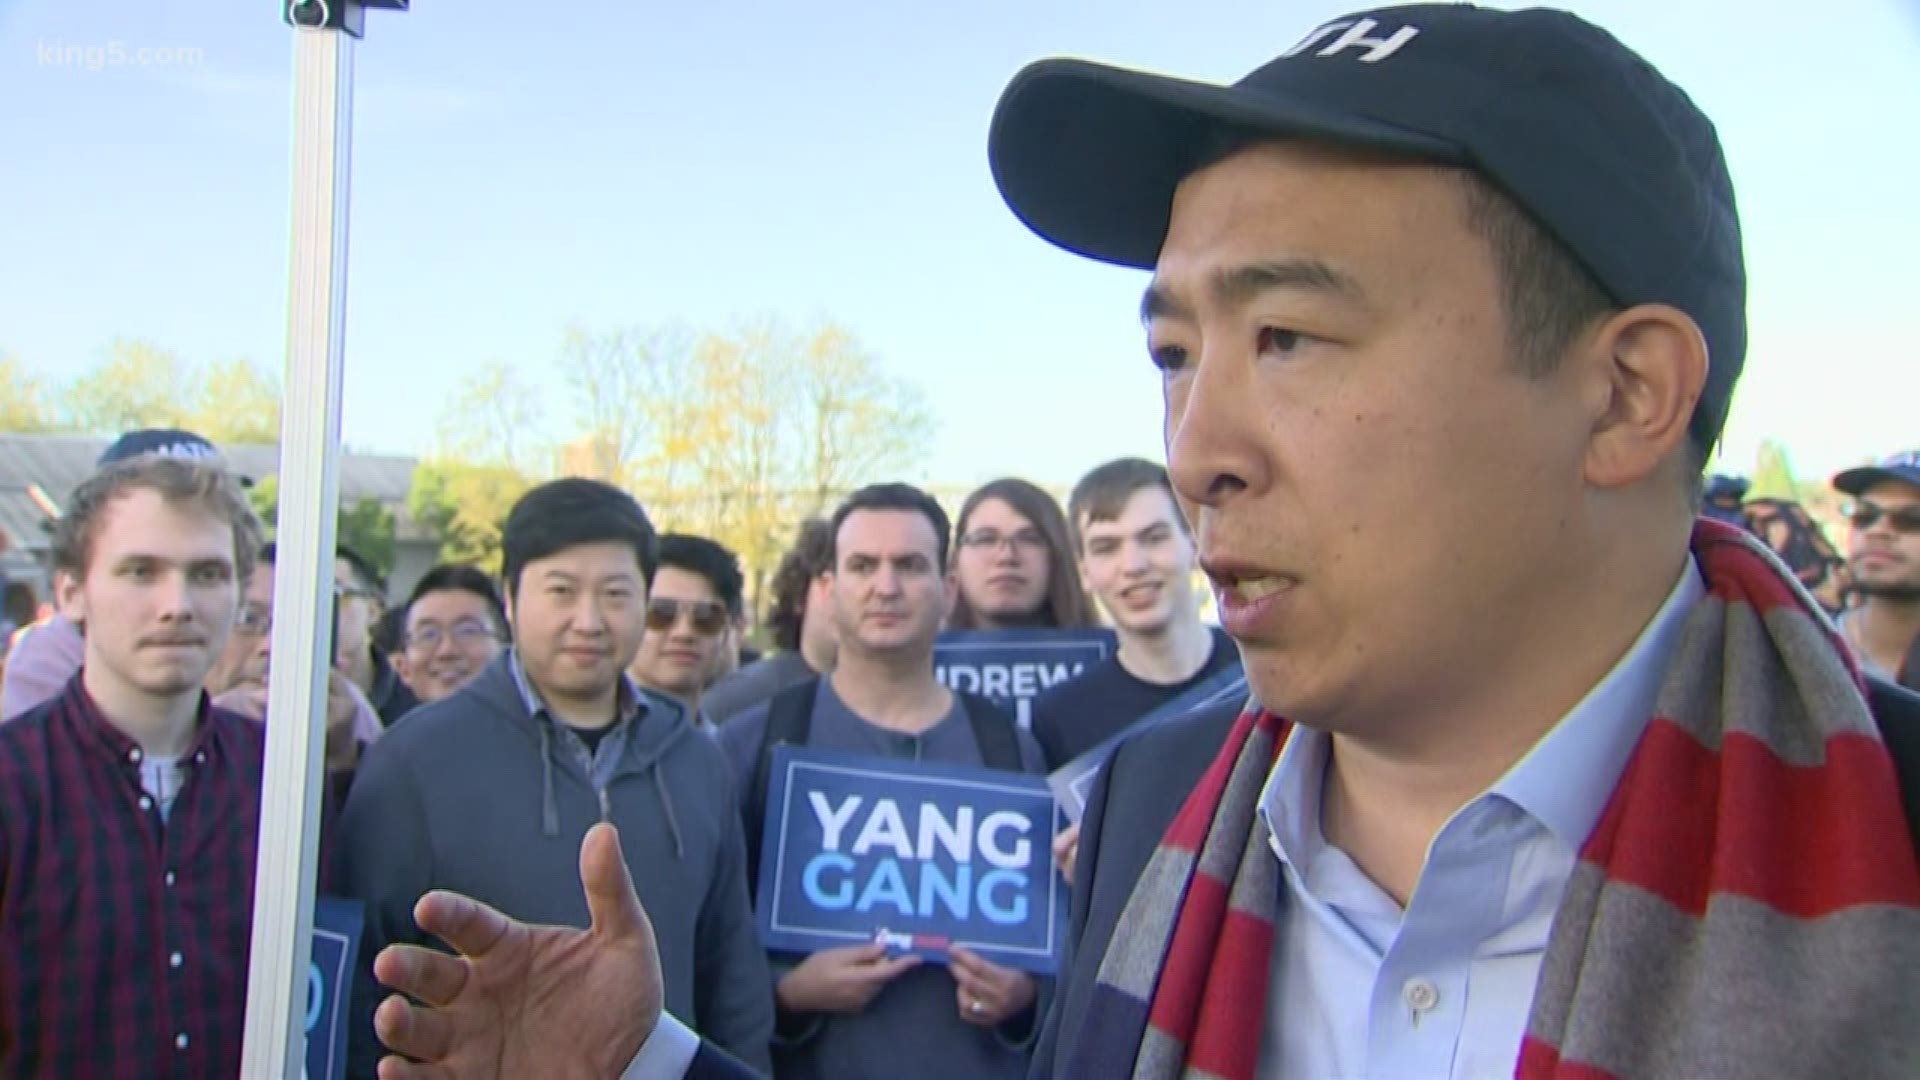 Tech entrepreneur Andrew Yang said his flagship proposal if elected president would be to implement Universal Basic Income of $1,000 a month for every American adult. KING 5's Natalie Swaby met Yang in Seattle.